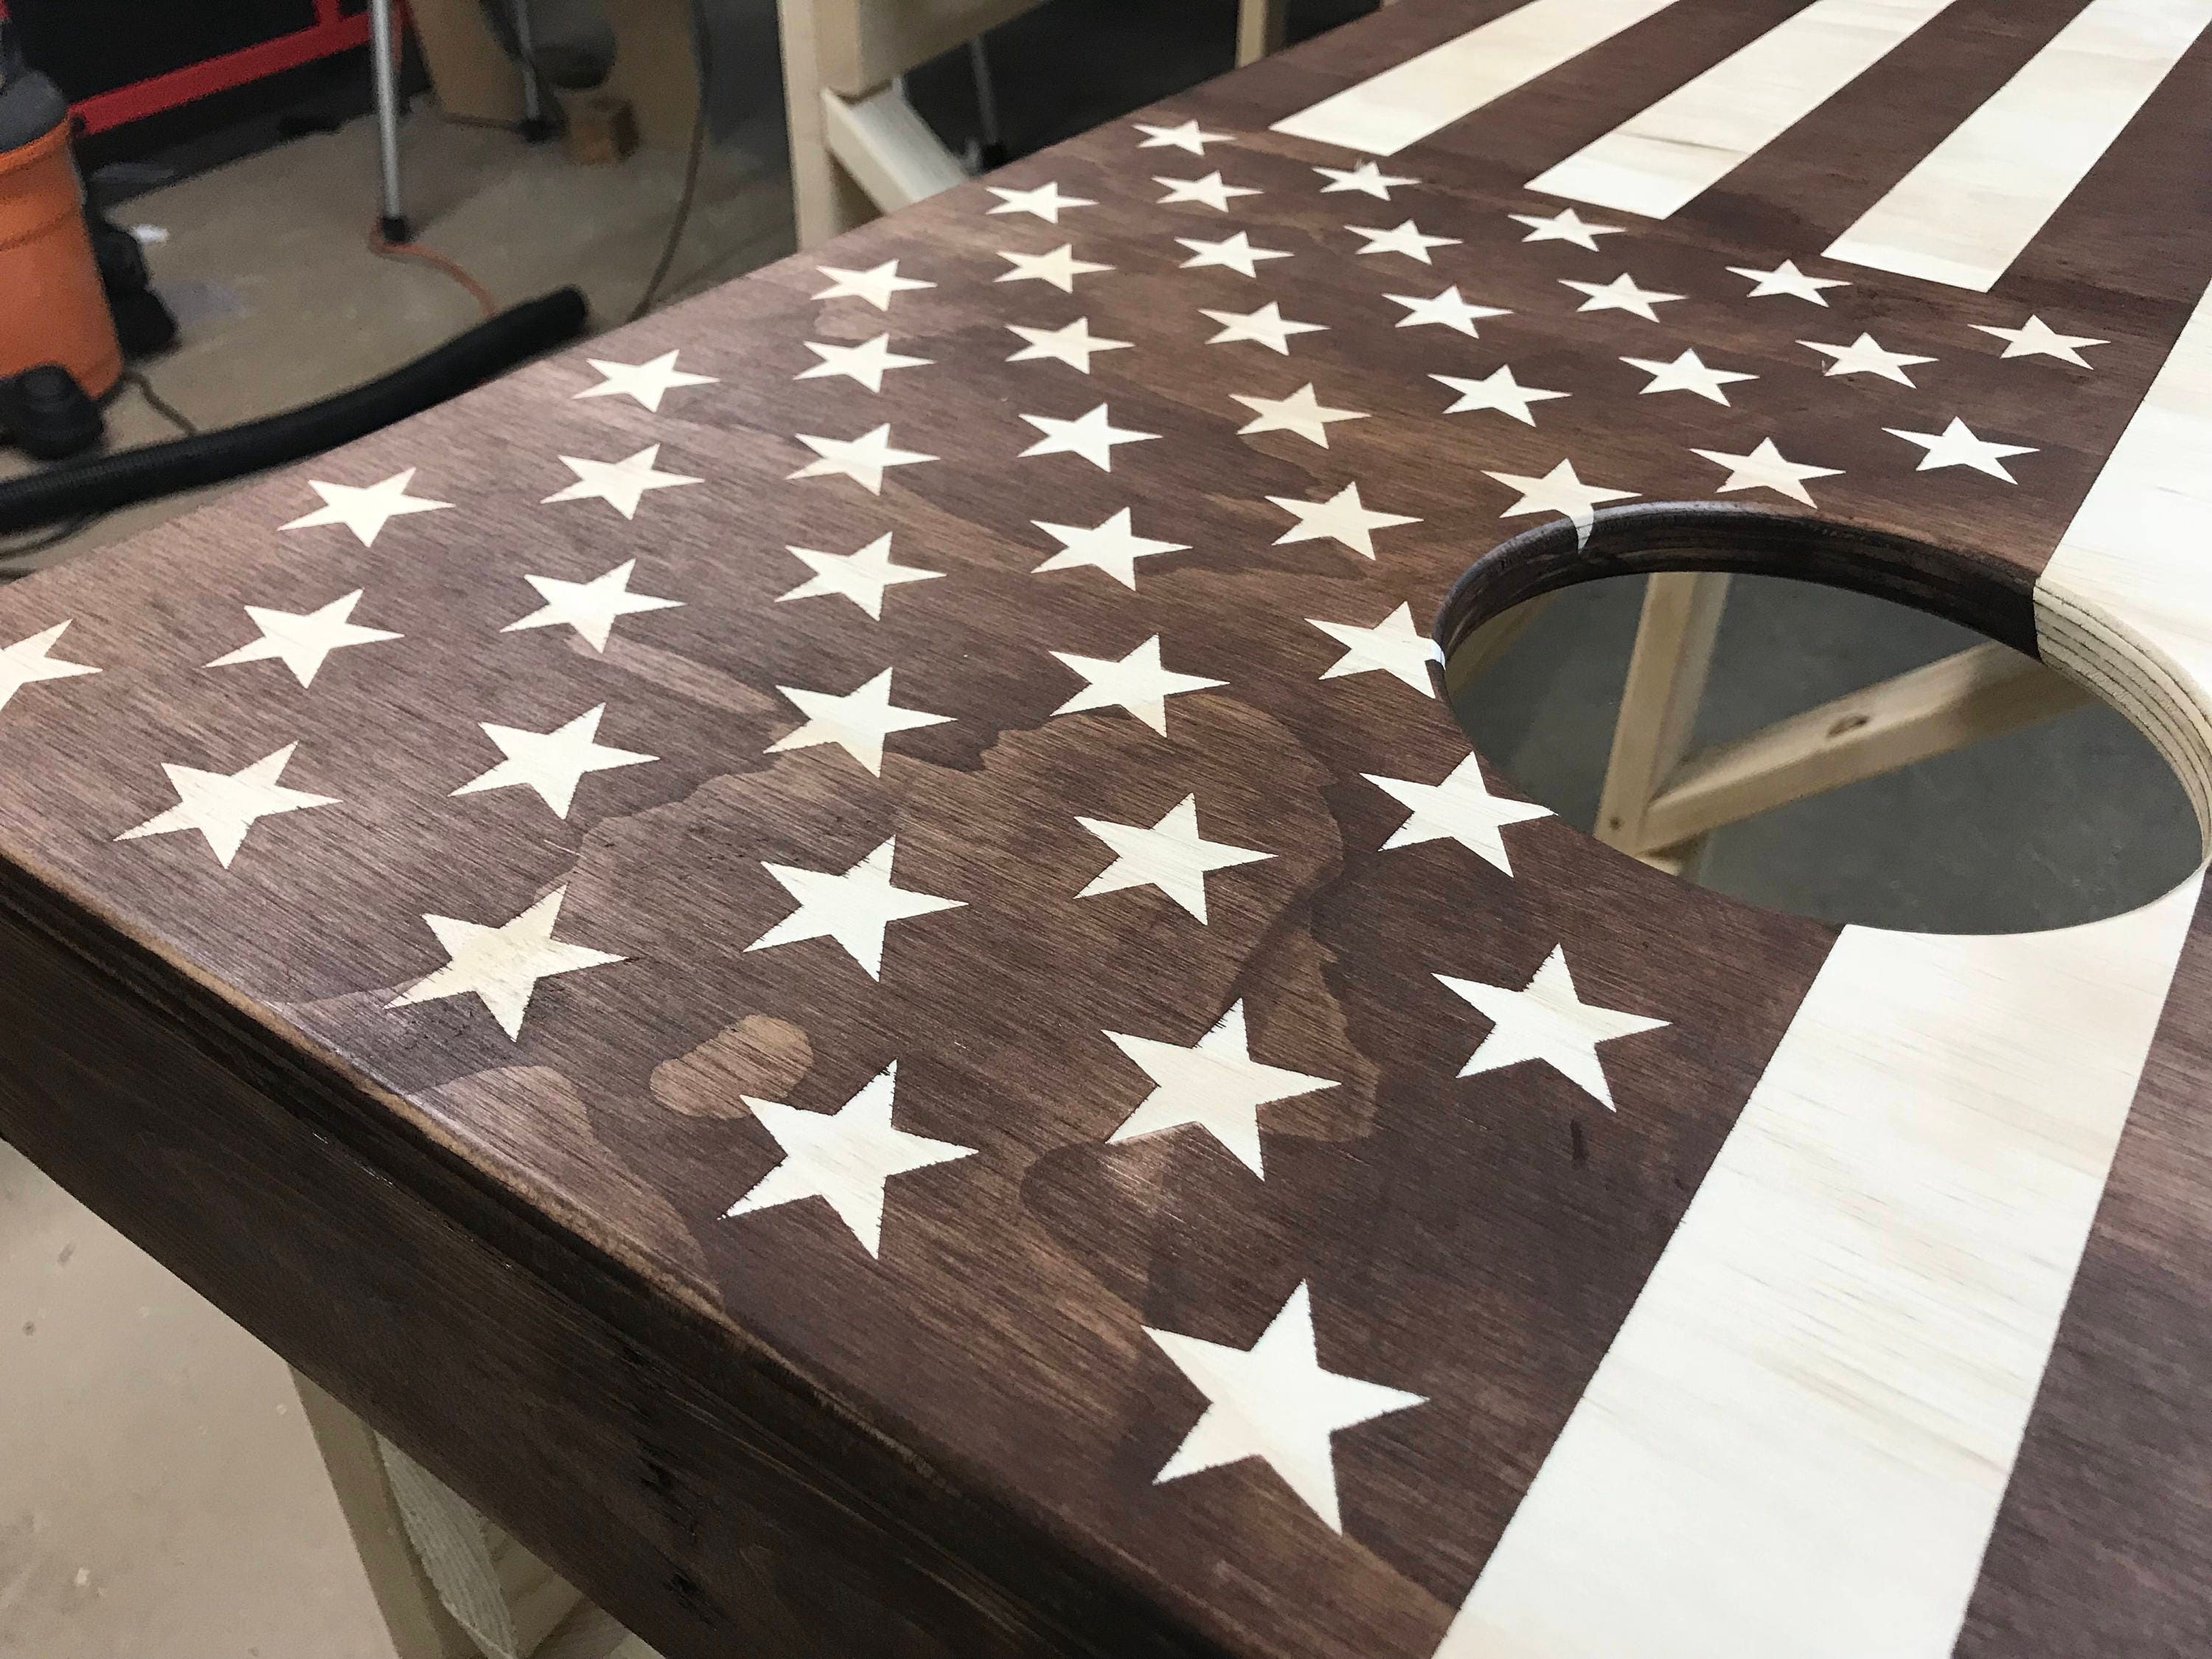 USA stars vinyl Stencil or decal GREAT for DIY projects